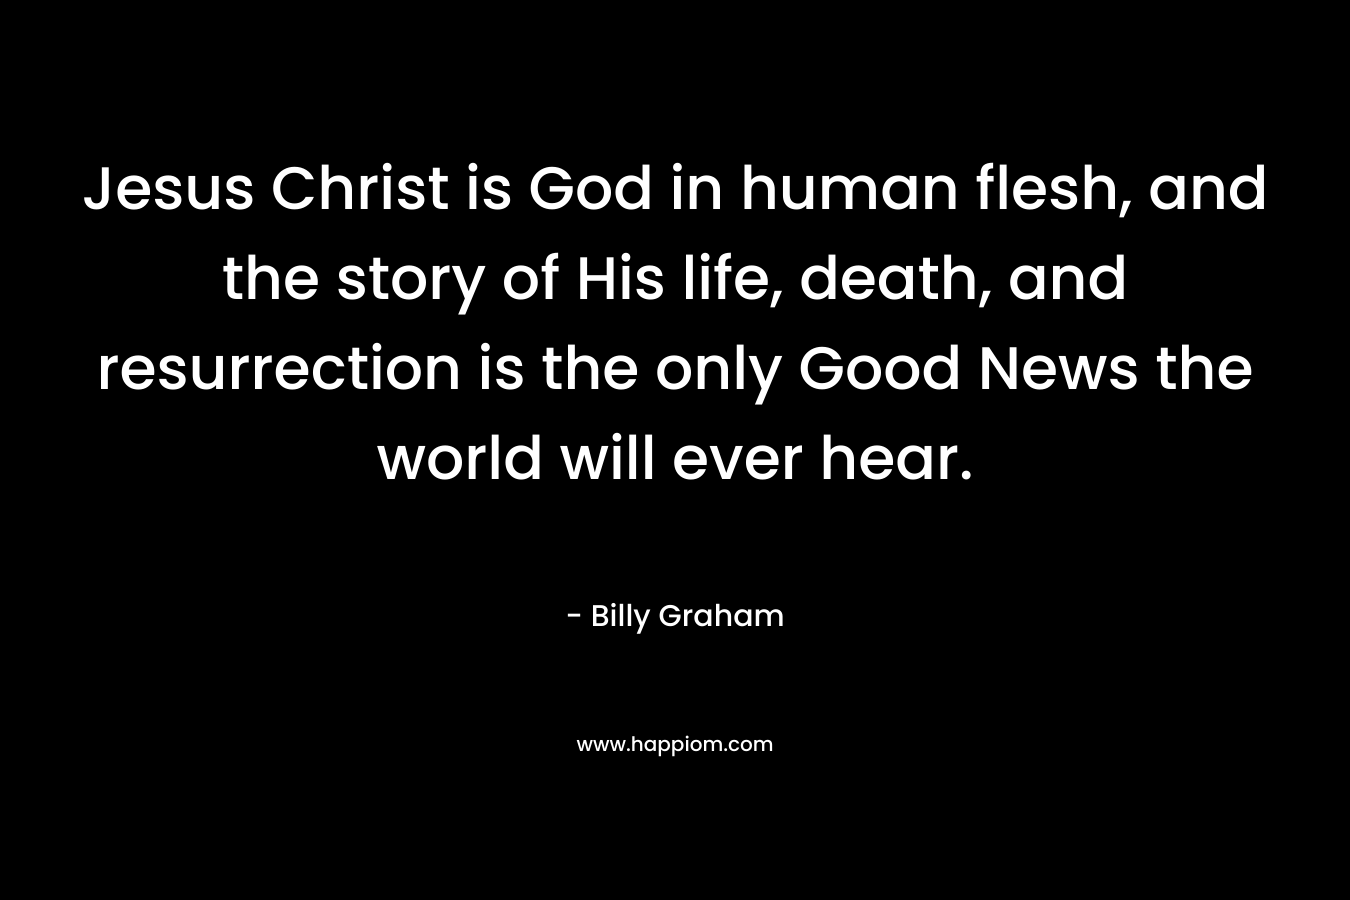 Jesus Christ is God in human flesh, and the story of His life, death, and resurrection is the only Good News the world will ever hear.